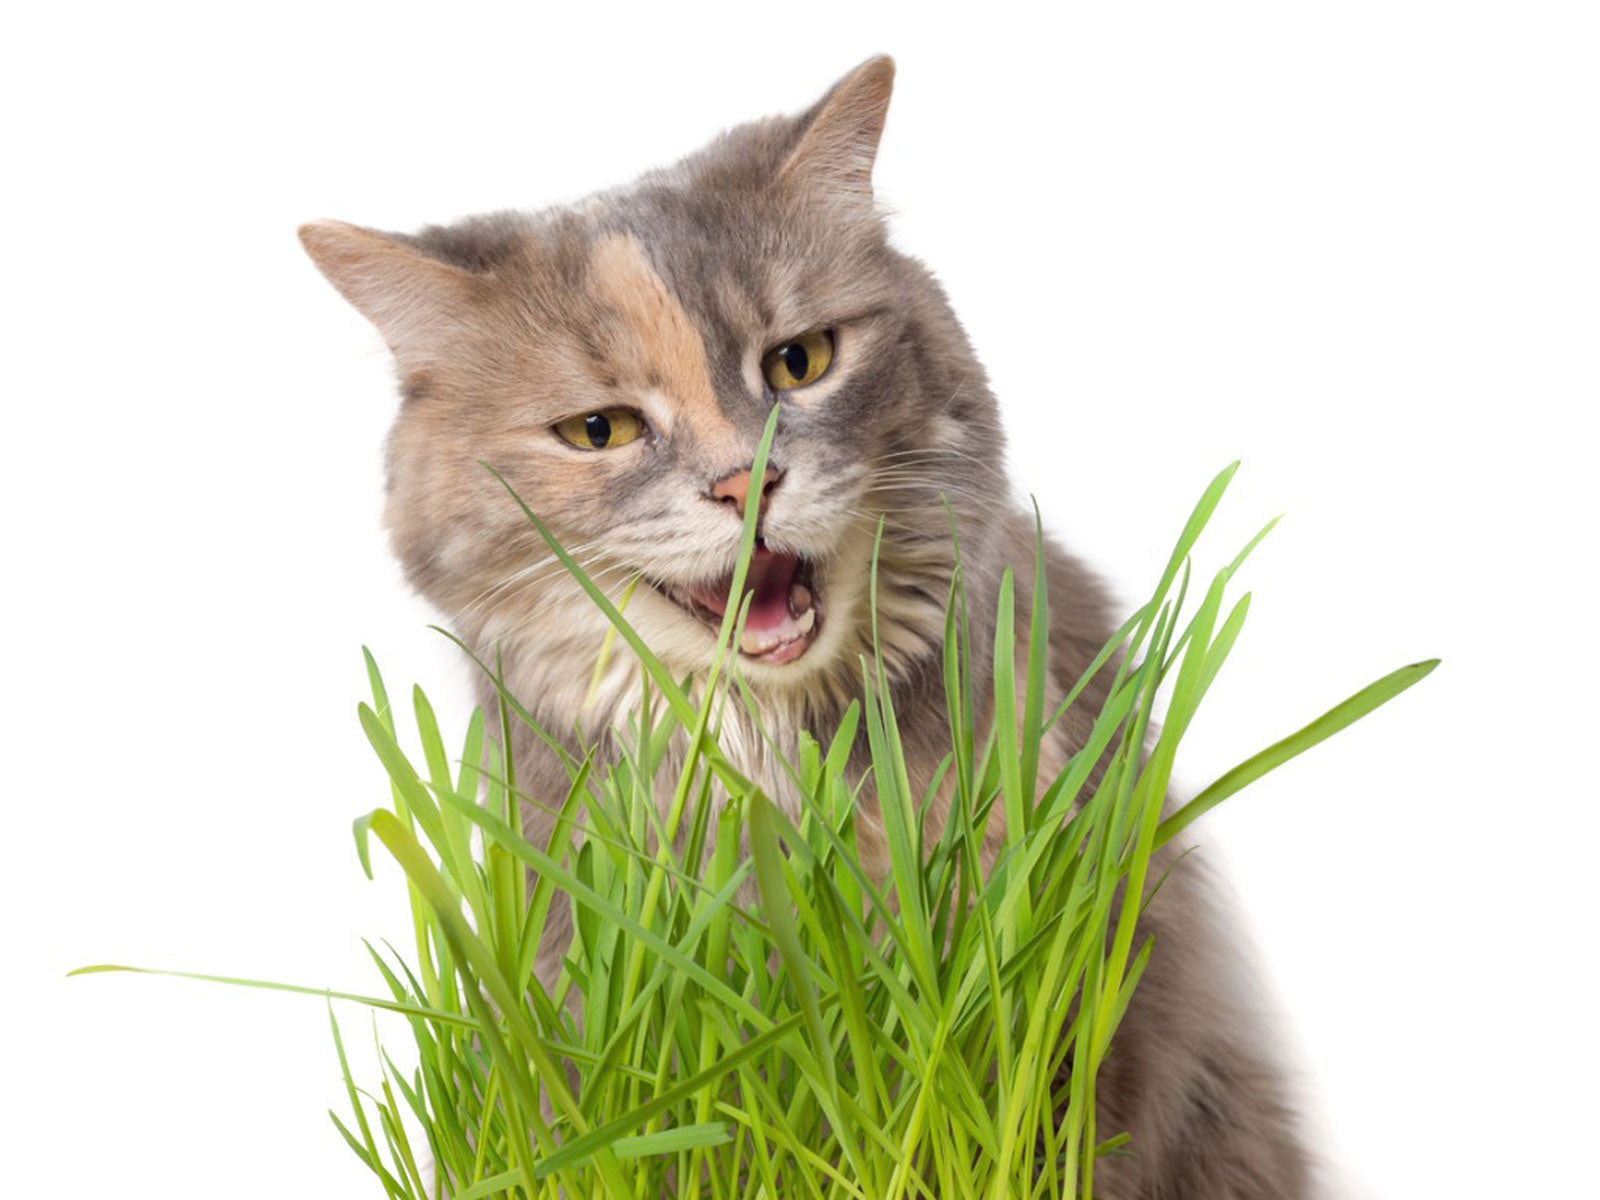 Cat Grass (Cyperus) indoor house plant with tall, lush green blades, perfect for cats and indoor décor.